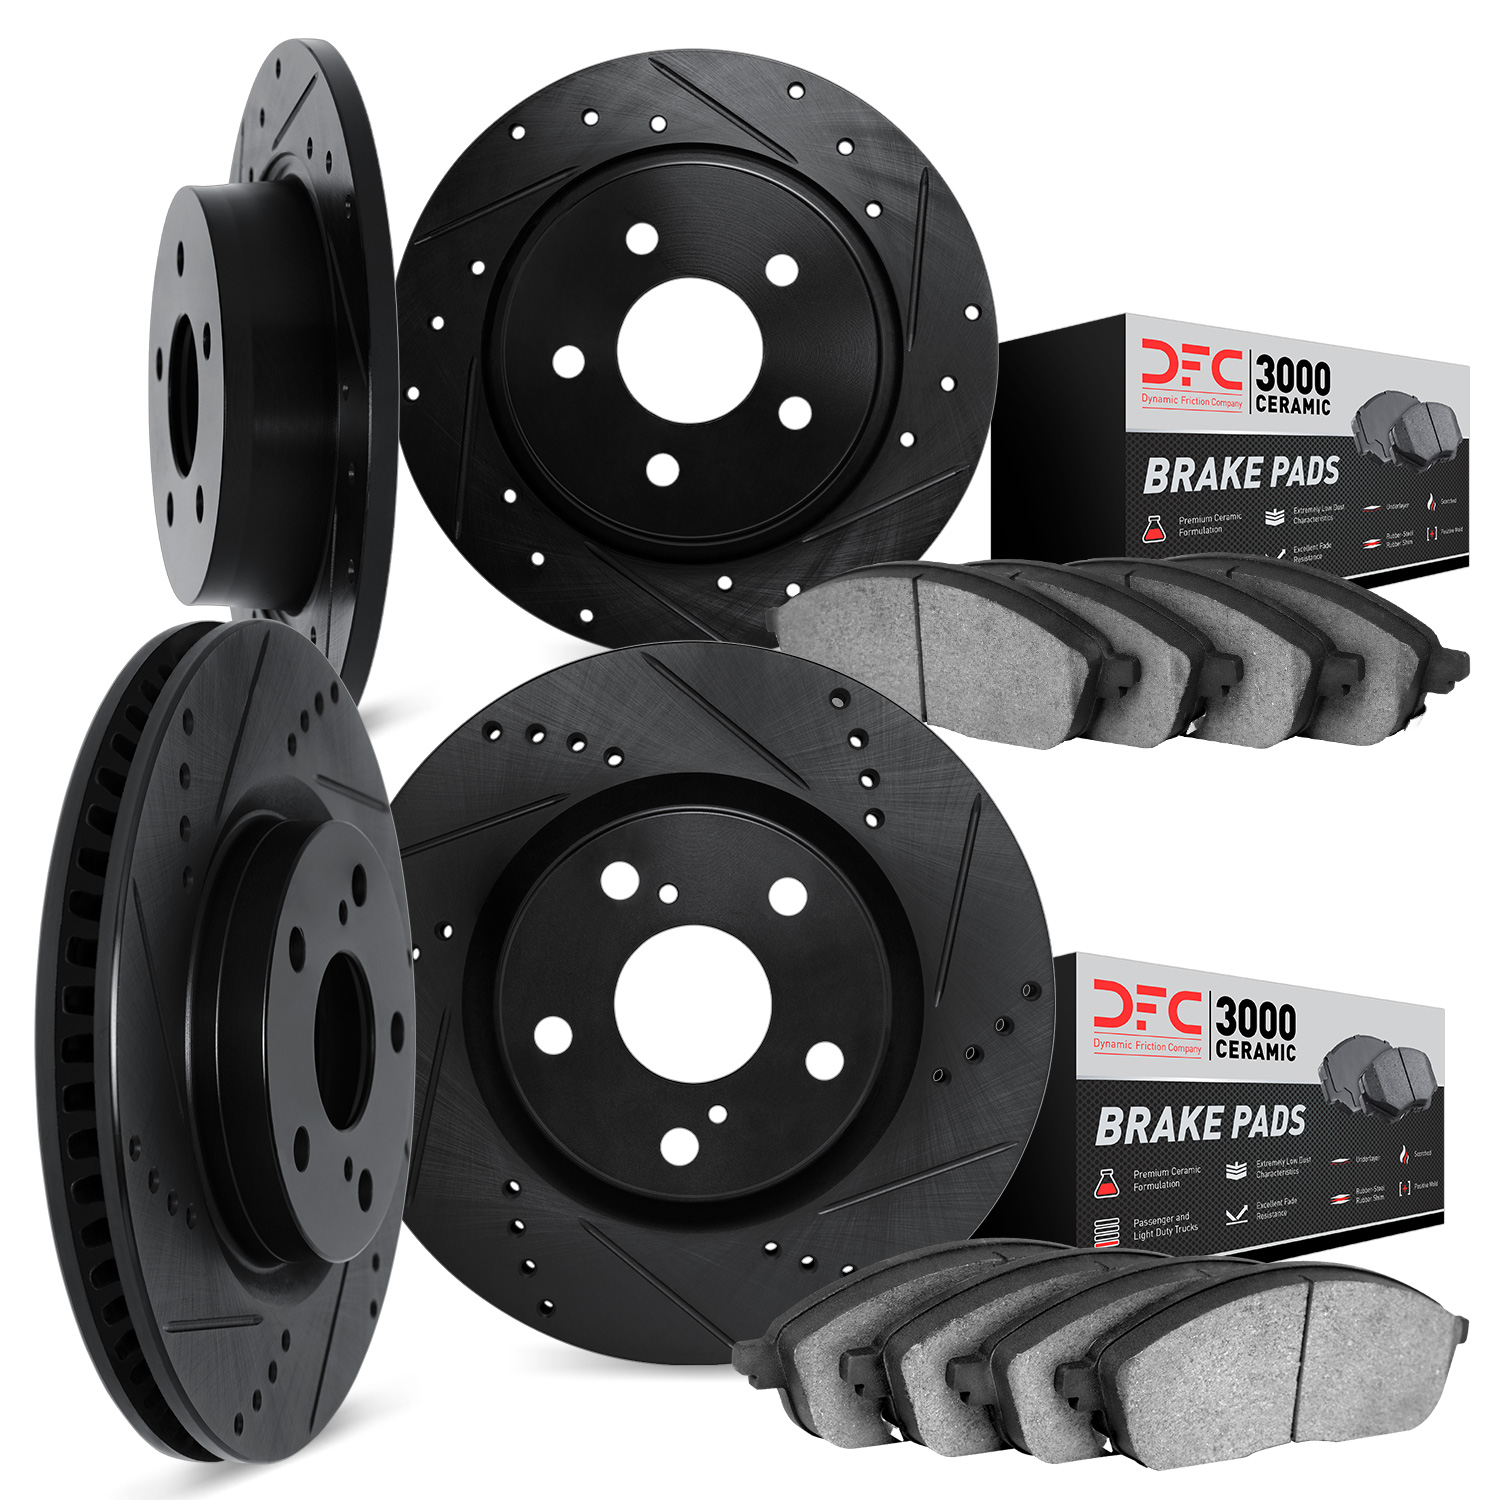 8304-40012 Drilled/Slotted Brake Rotors with 3000-Series Ceramic Brake Pads Kit [Black], 1997-2000 Mopar, Position: Front and Re